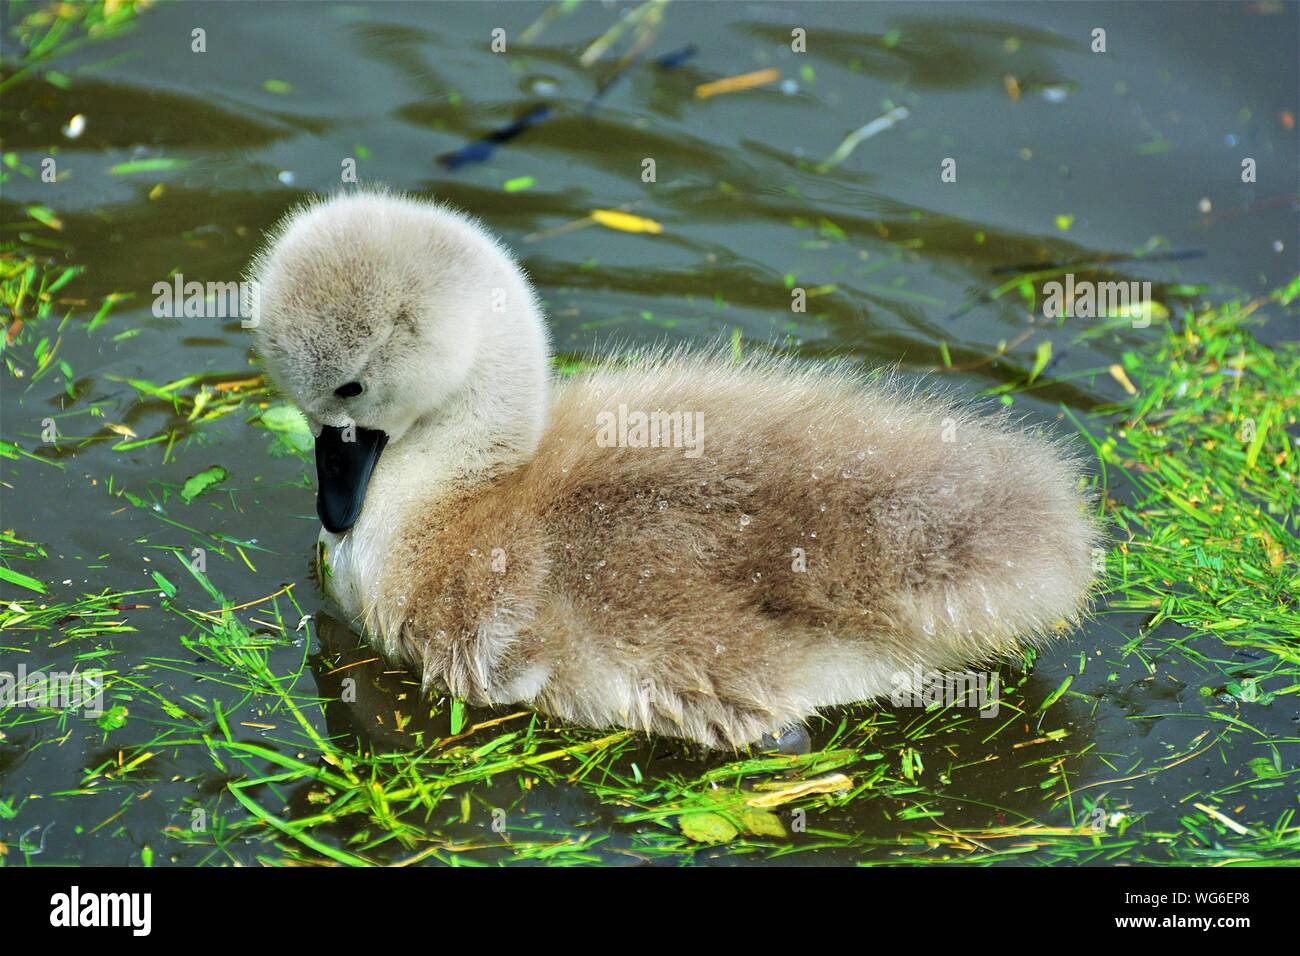 A cute Cygnet on the water looking coy. Stock Photo